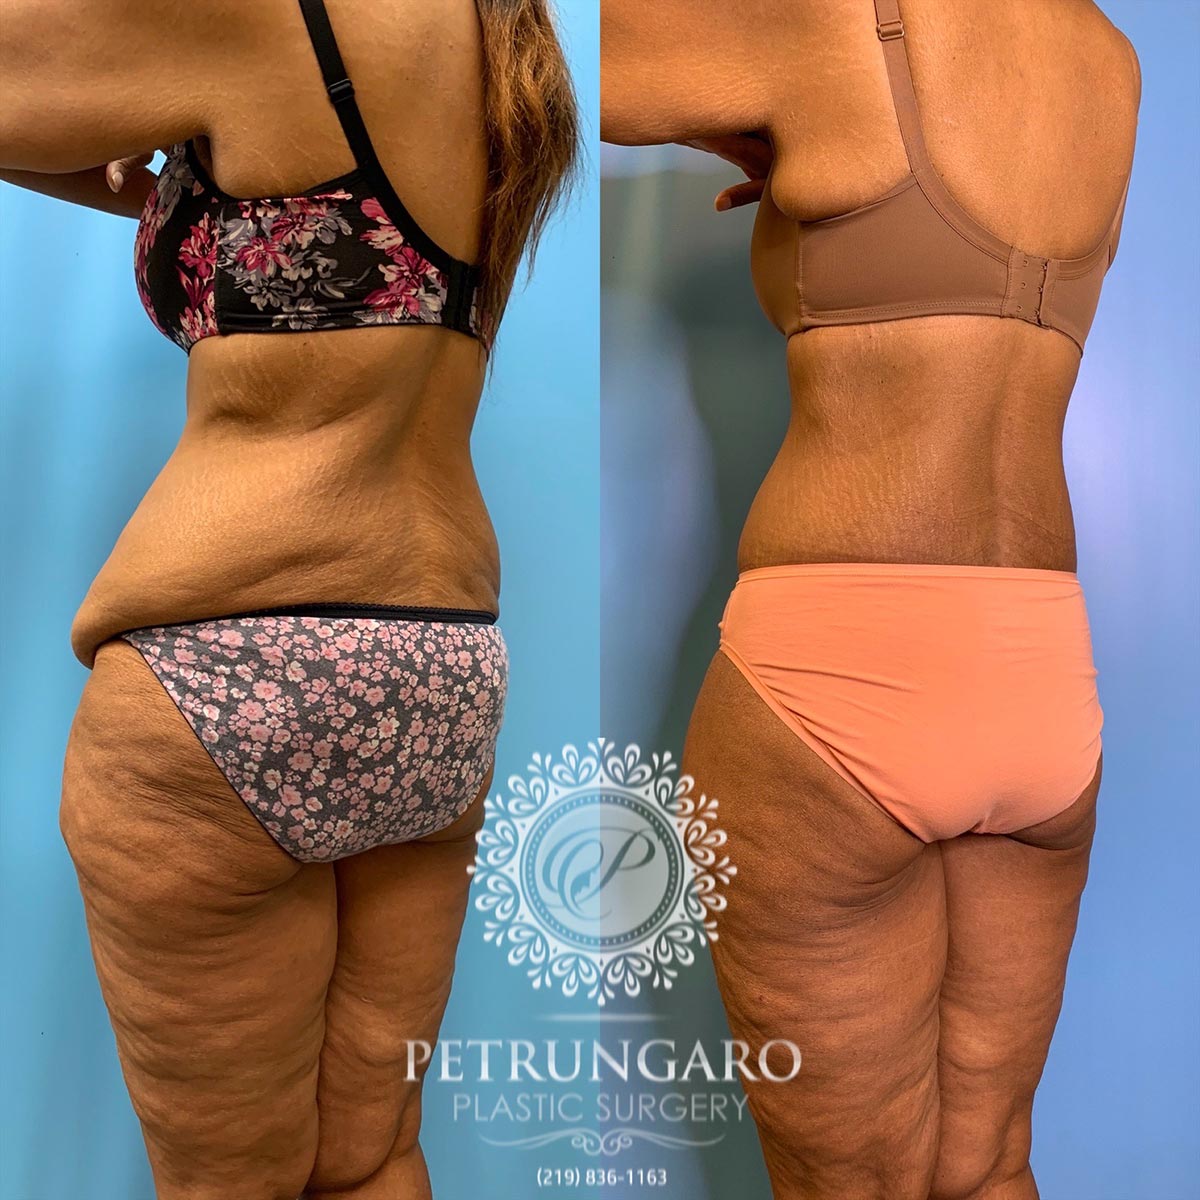 42 year old woman 3 months after a circumferential body lift-9